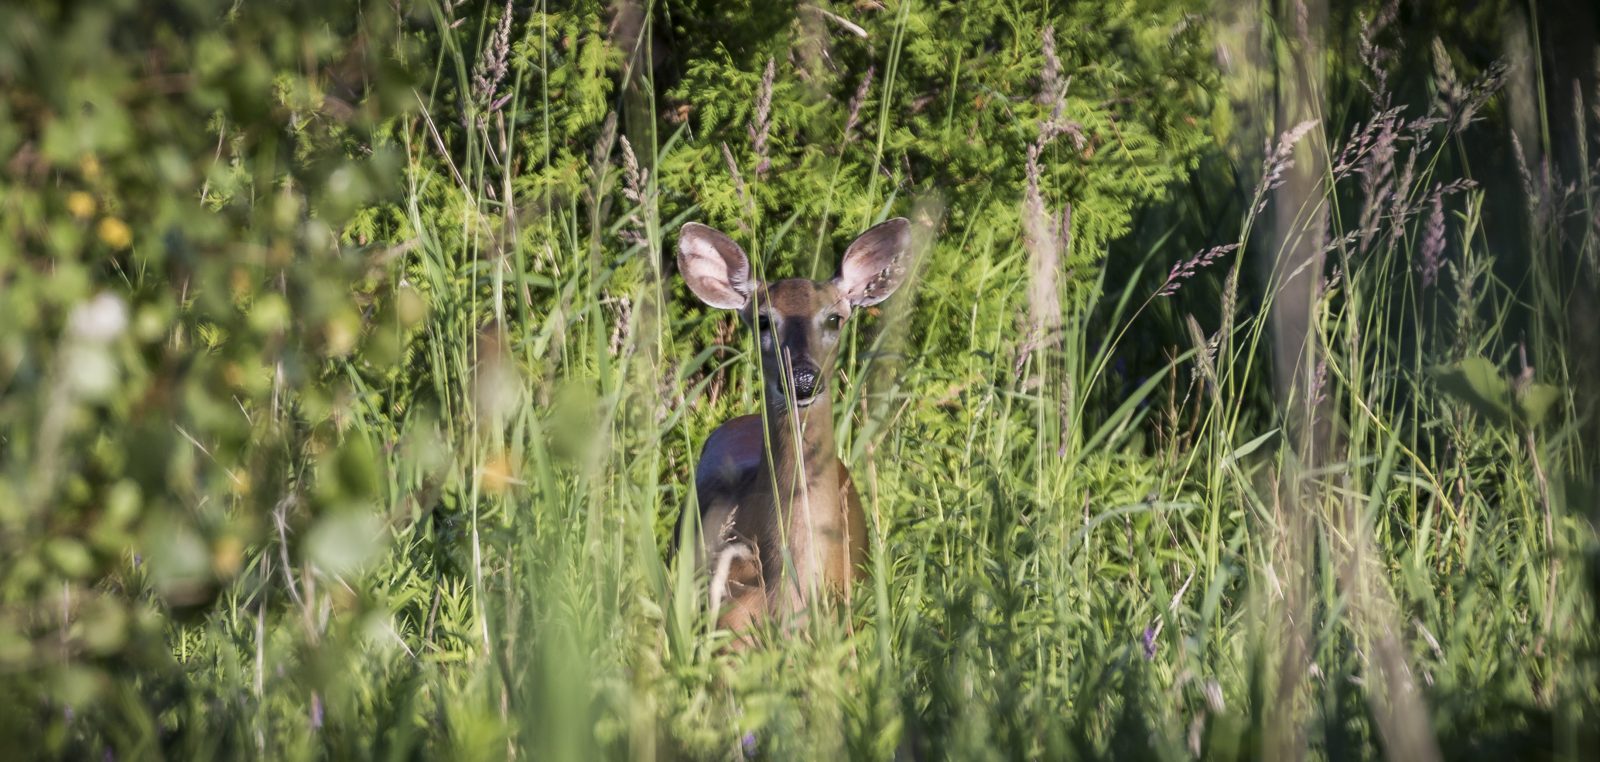 A deer stands hiding in tall green grass. It looks directly at the camera.